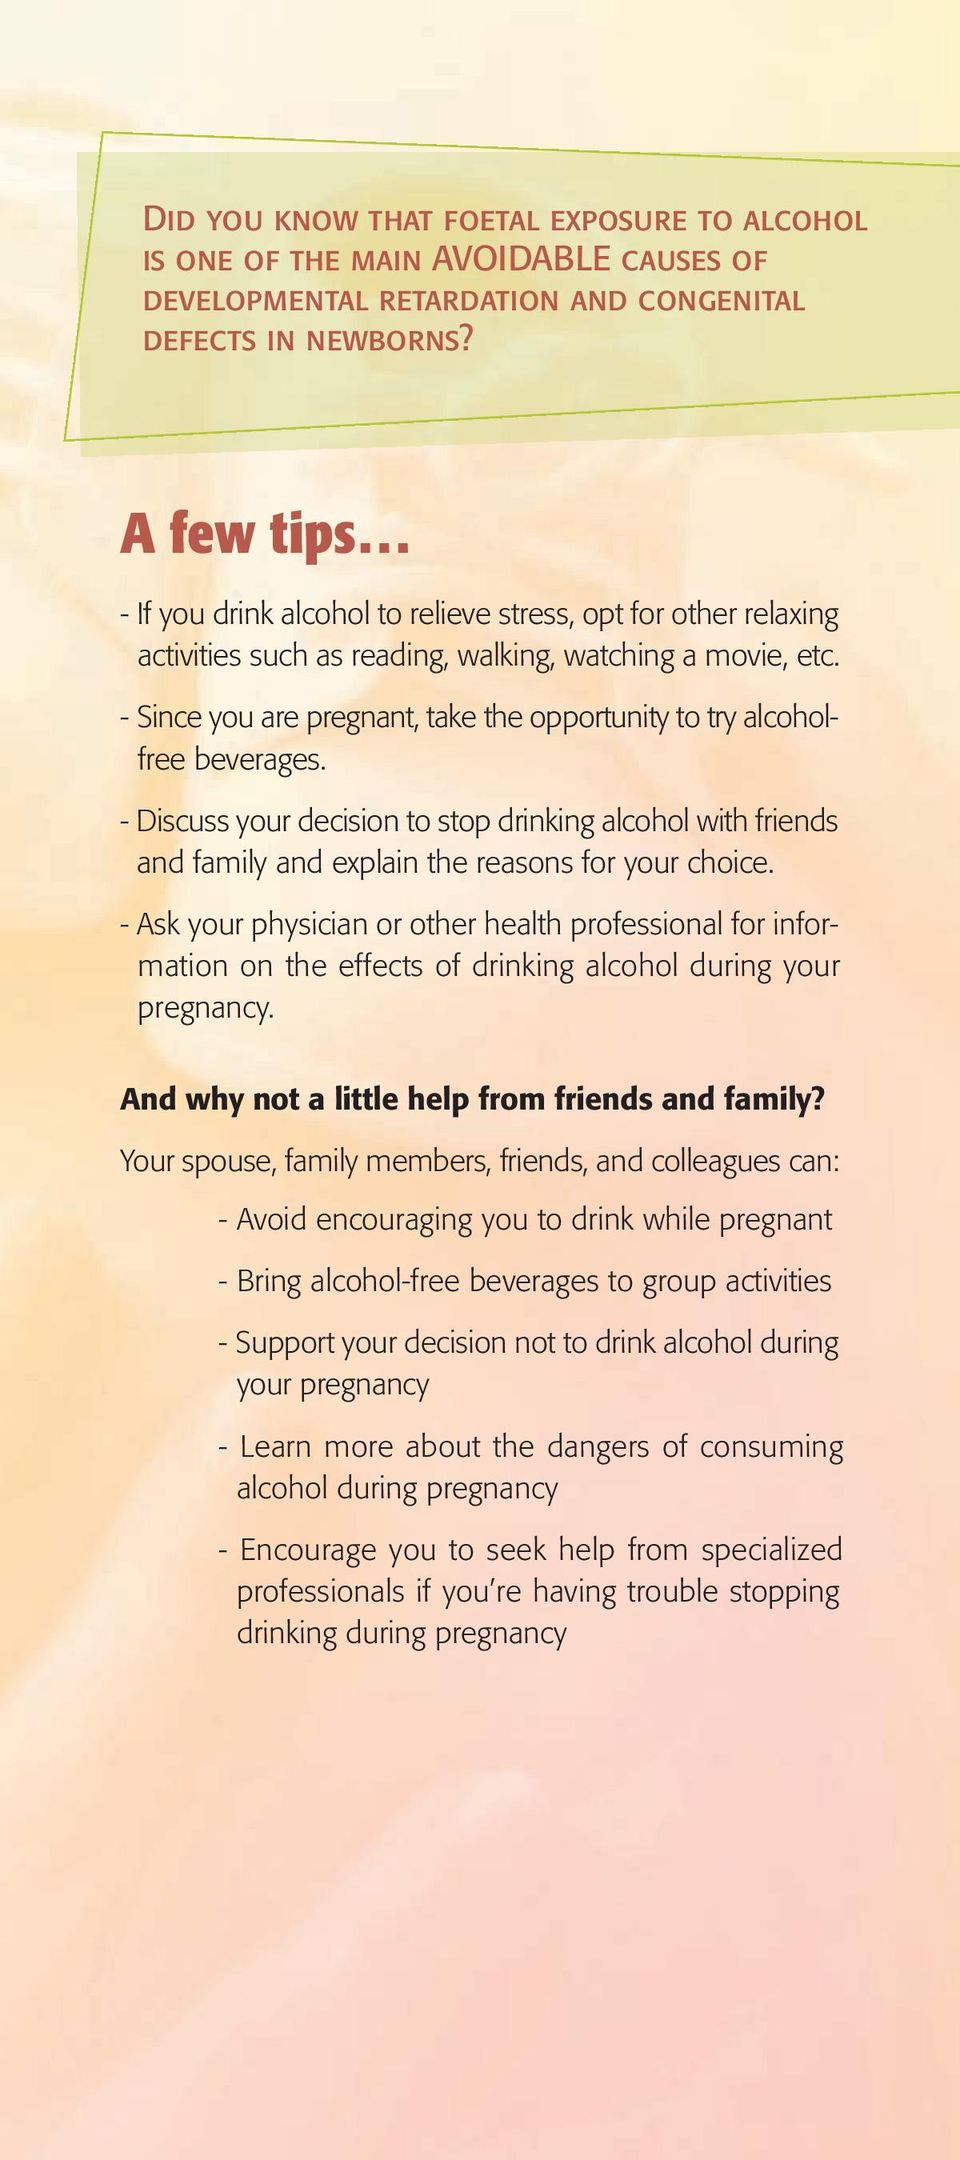 - Since you are pregnant, take the opportunity to try alcoholfree beverages. - Discuss your decision to stop drinking alcohol with friends and family and explain the reasons for your choice.